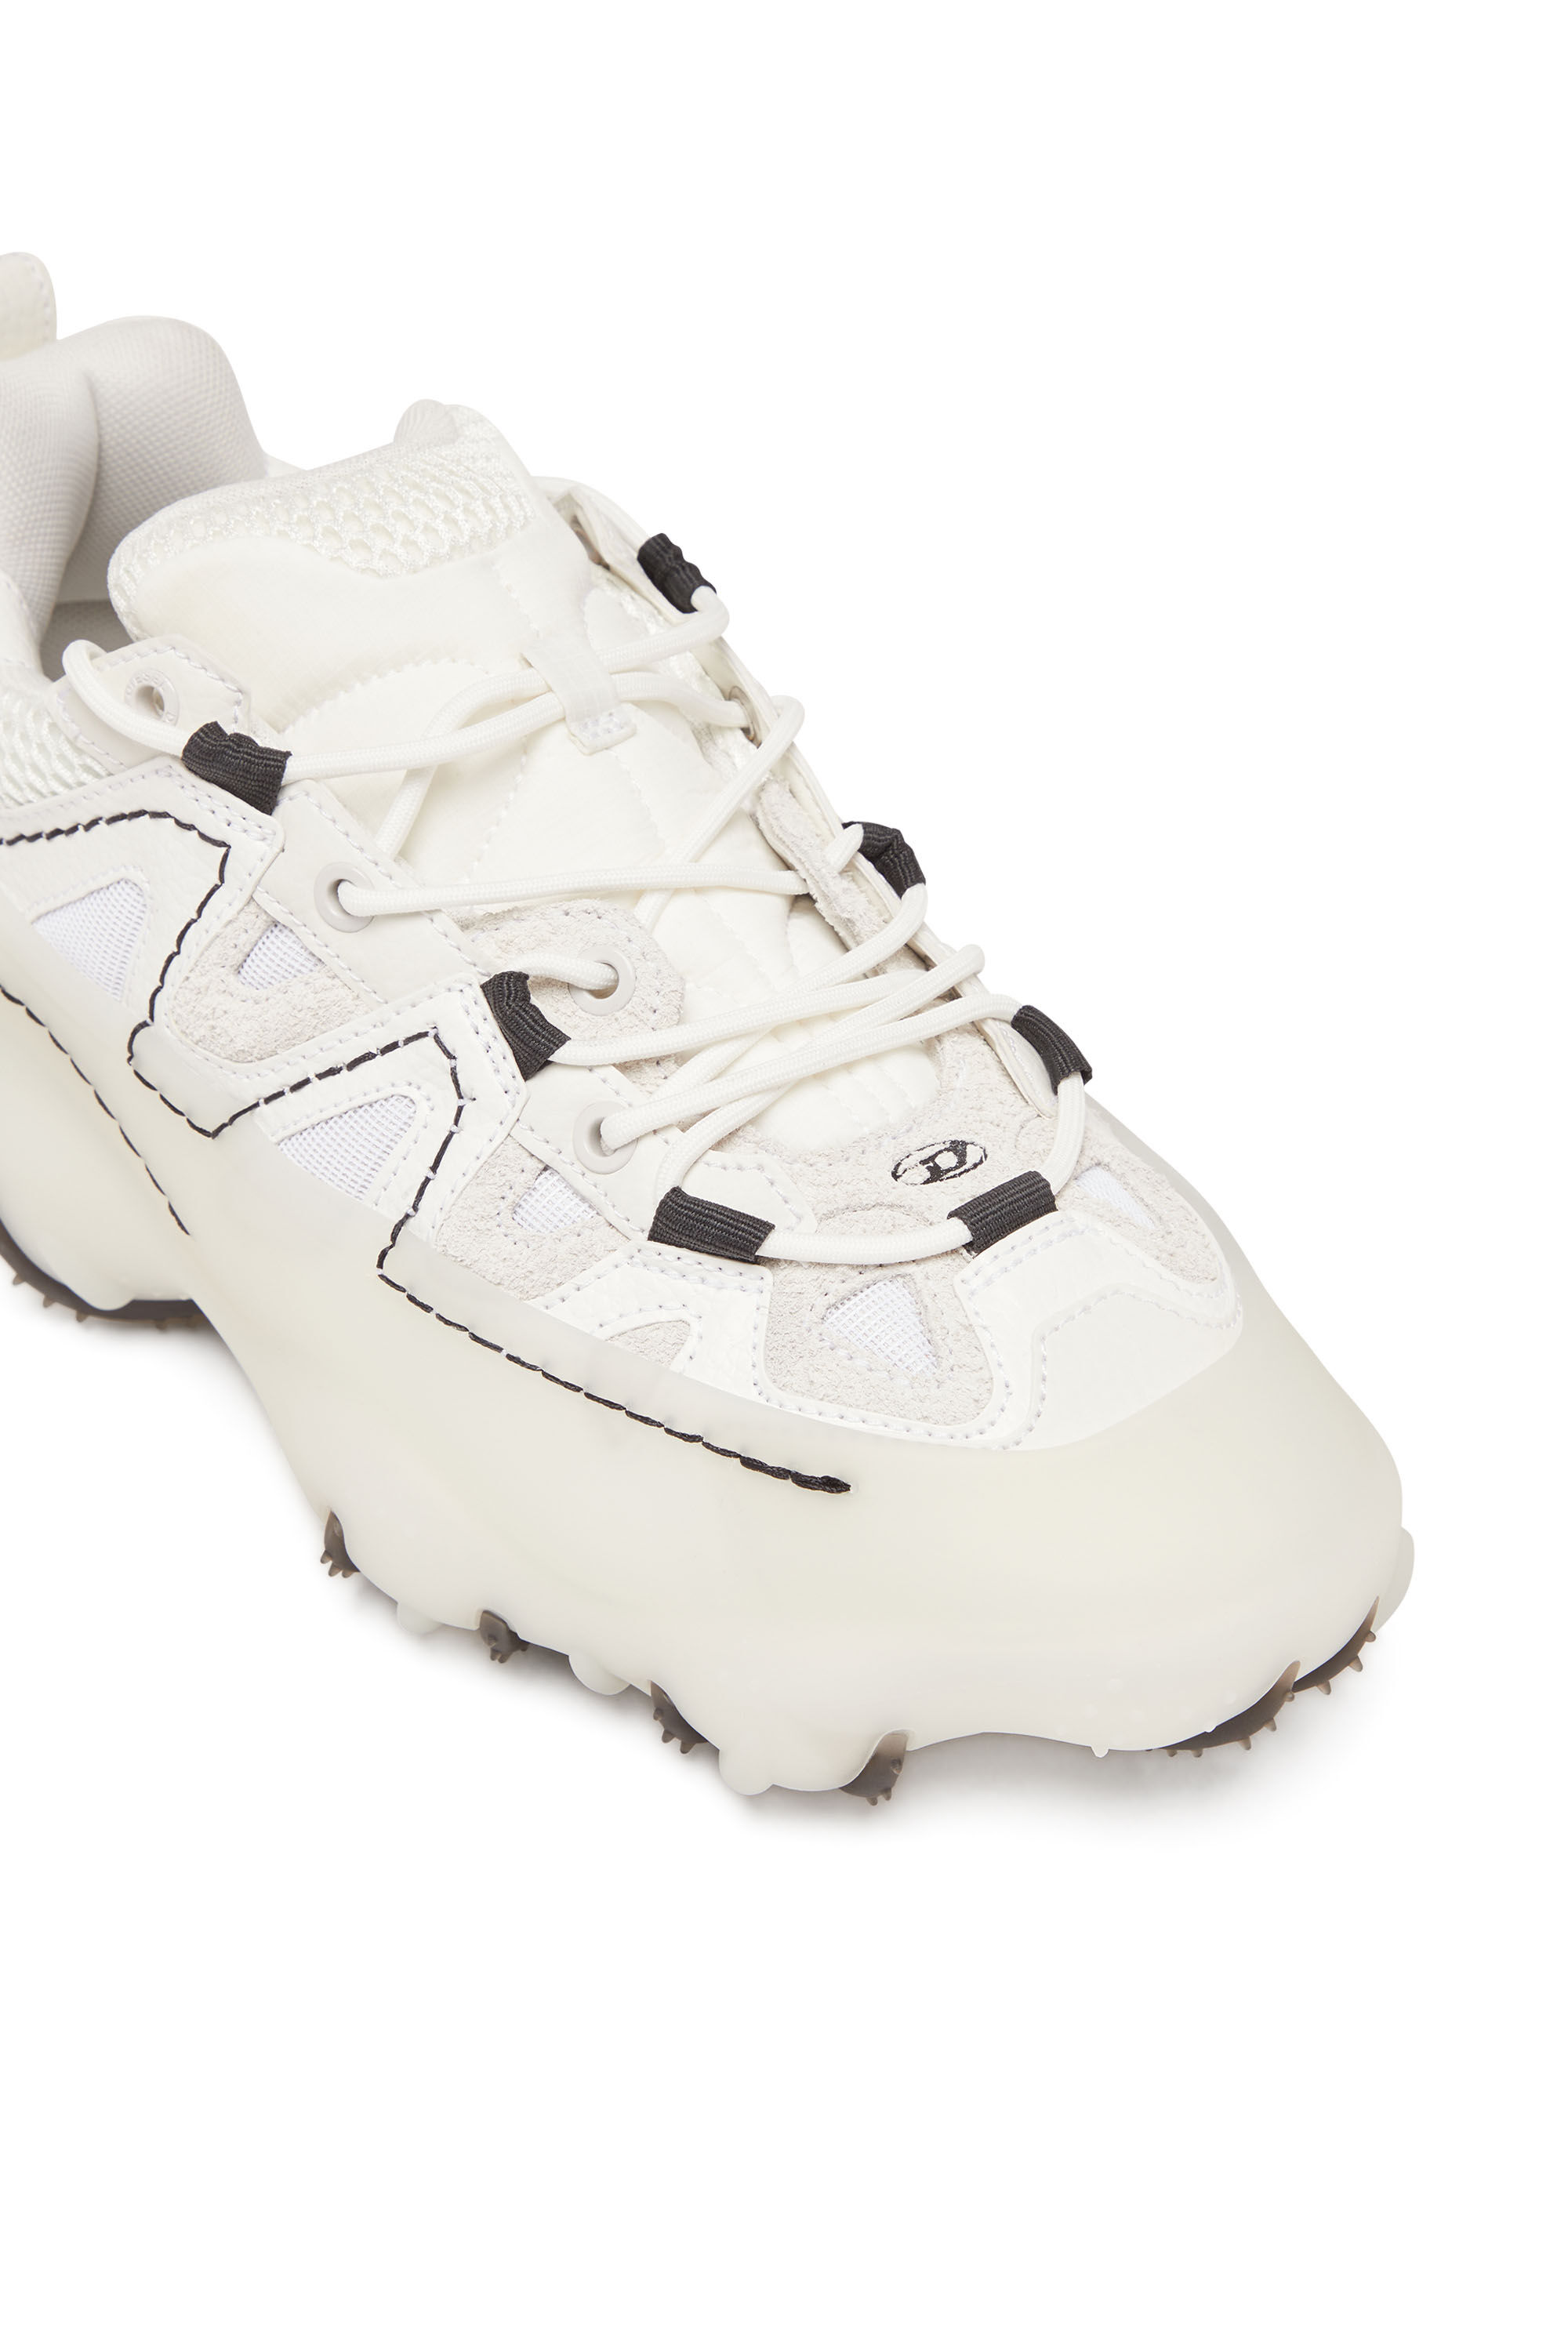 Diesel - S-PROTOTYPE P1, Man S-Prototype P1-Low-top sneakers with rubber overlay in White - Image 6